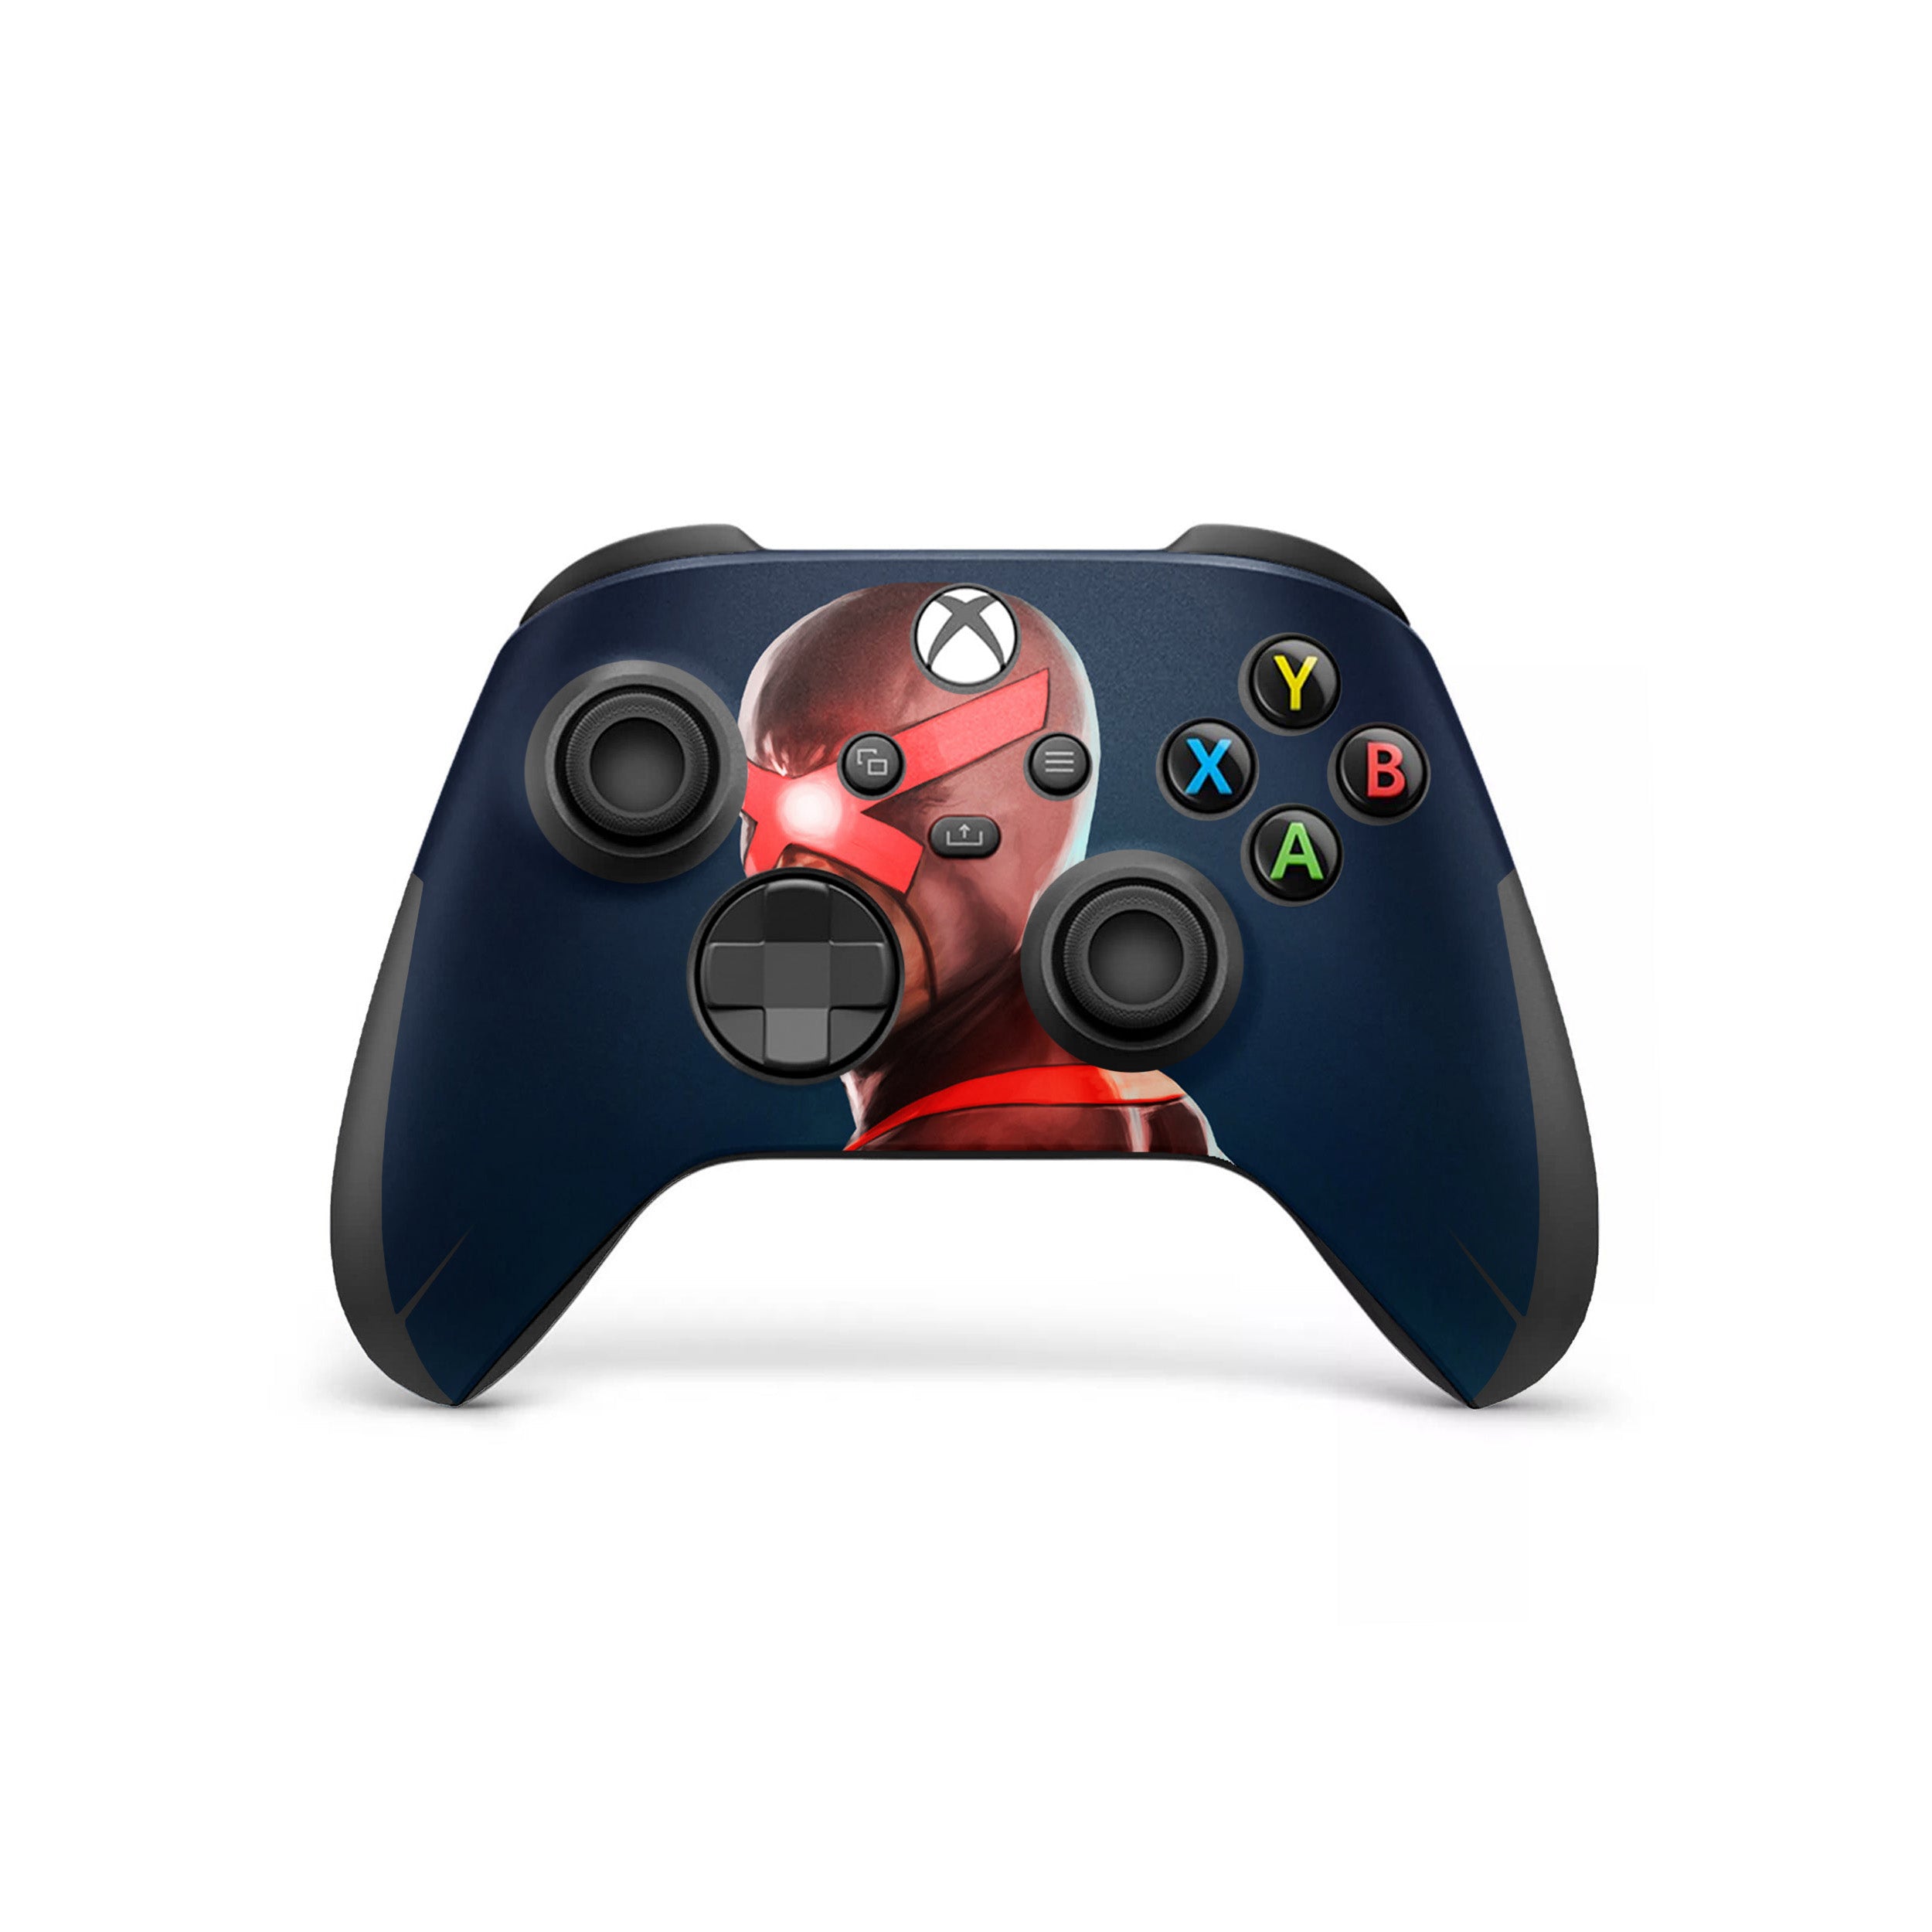 A video game skin featuring a Marvel Comics X Men Cyclops design for the Xbox Wireless Controller.